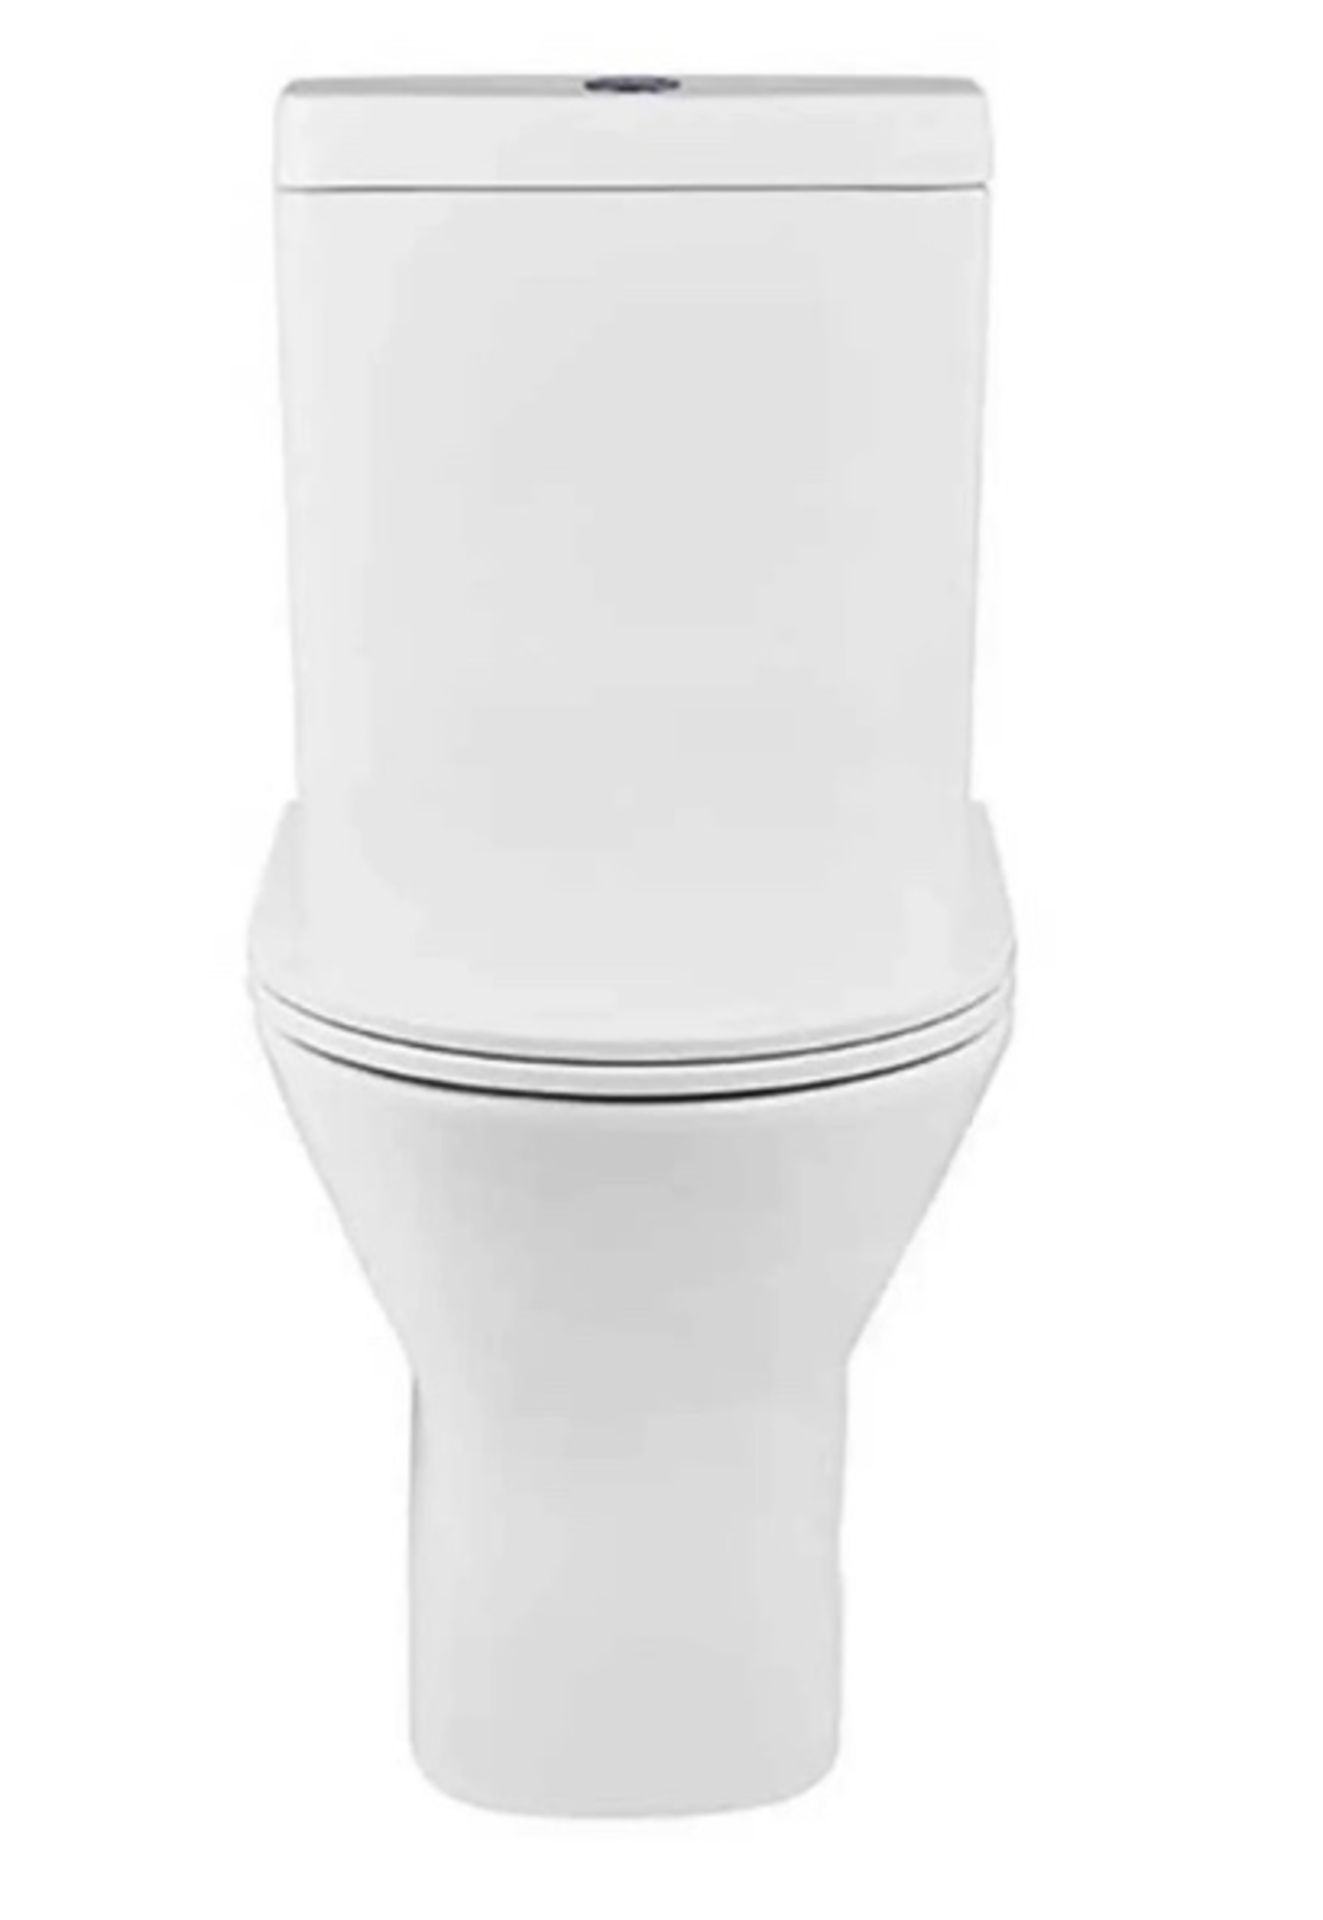 Brand New Boxed Falcon Rimless Back To Wall Close Coupled Toilet PAN ONLY RRP £190 **No Vat**